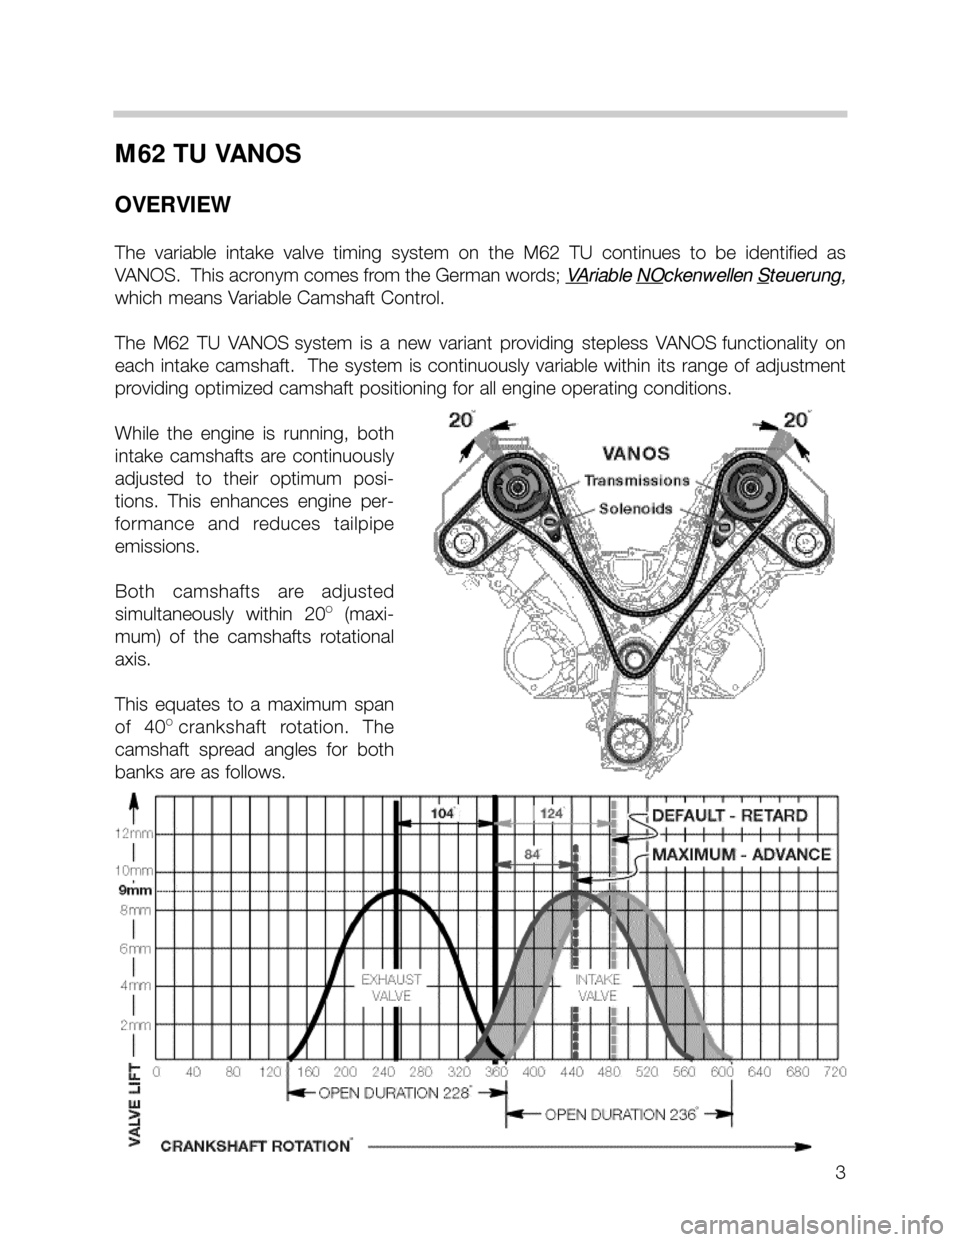 BMW 735i 2000 E38 M62TU Engine Workshop Manual 3
M62 TU VANOS
OVERVIEW
The  variable  intake  valve  timing  system  on  the  M62  TU  continues  to  be  identified  as
VANOS.  This acronym comes from the German words; V
Ariable NOckenwellen Steue